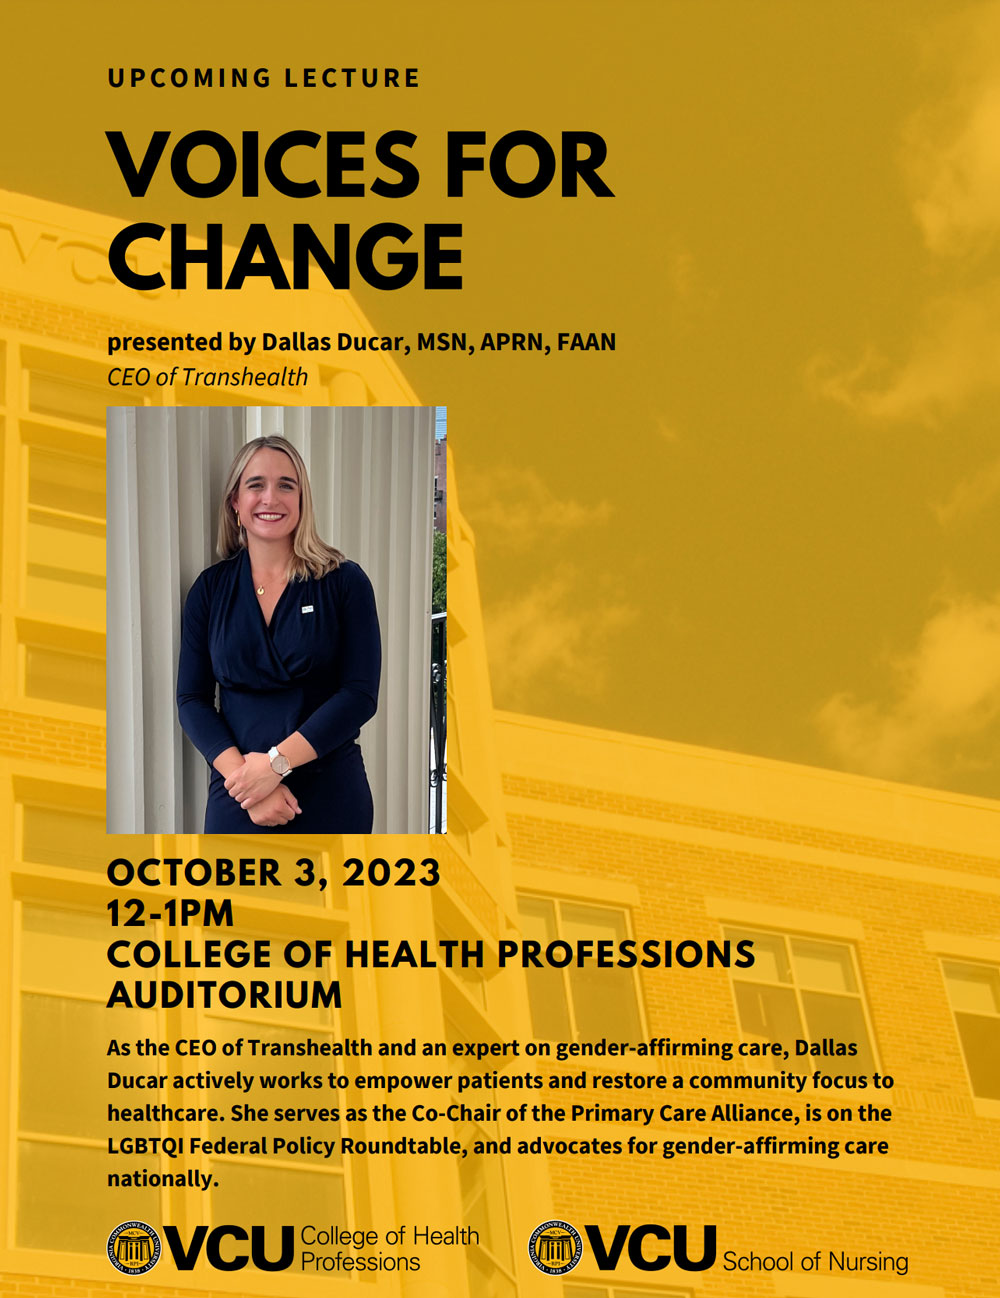 Oct 3 2023 12-1pm at CHP Auditorium Voices for Change presented by Dallas Ducar. Sponsored by VCU CHP and VCU School of Nursing